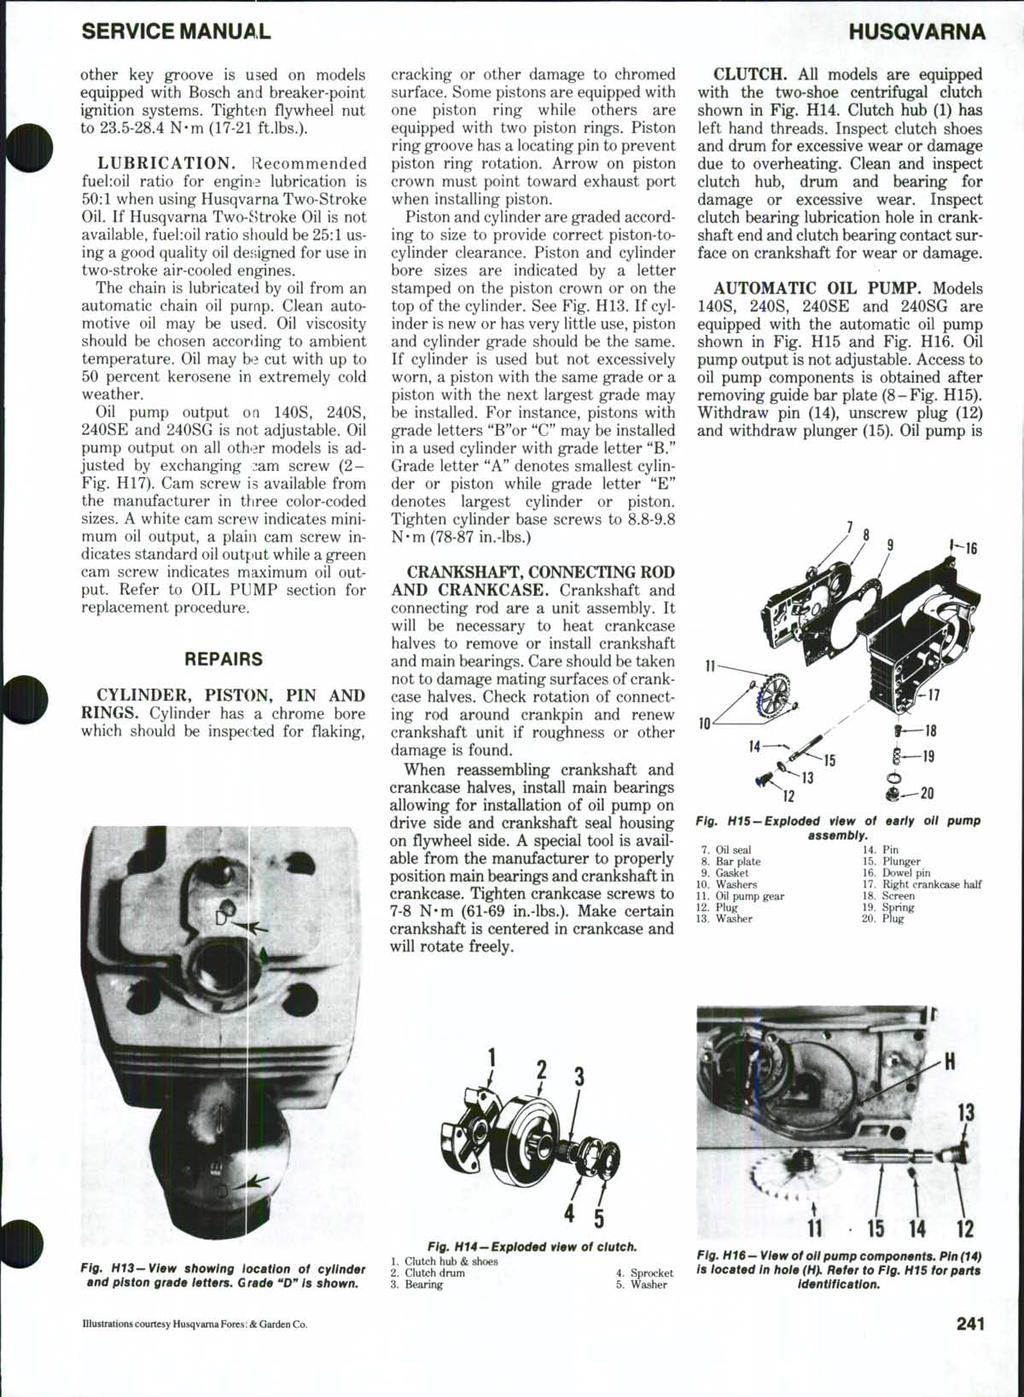 SERVICE MANUAL other key groove is used on models equipped with Bosch and breaker-point ignition systems. Tighten flywheel nut to 23.5-28.4 N-m (17-21 ft.lbs.). LUBRICATION.